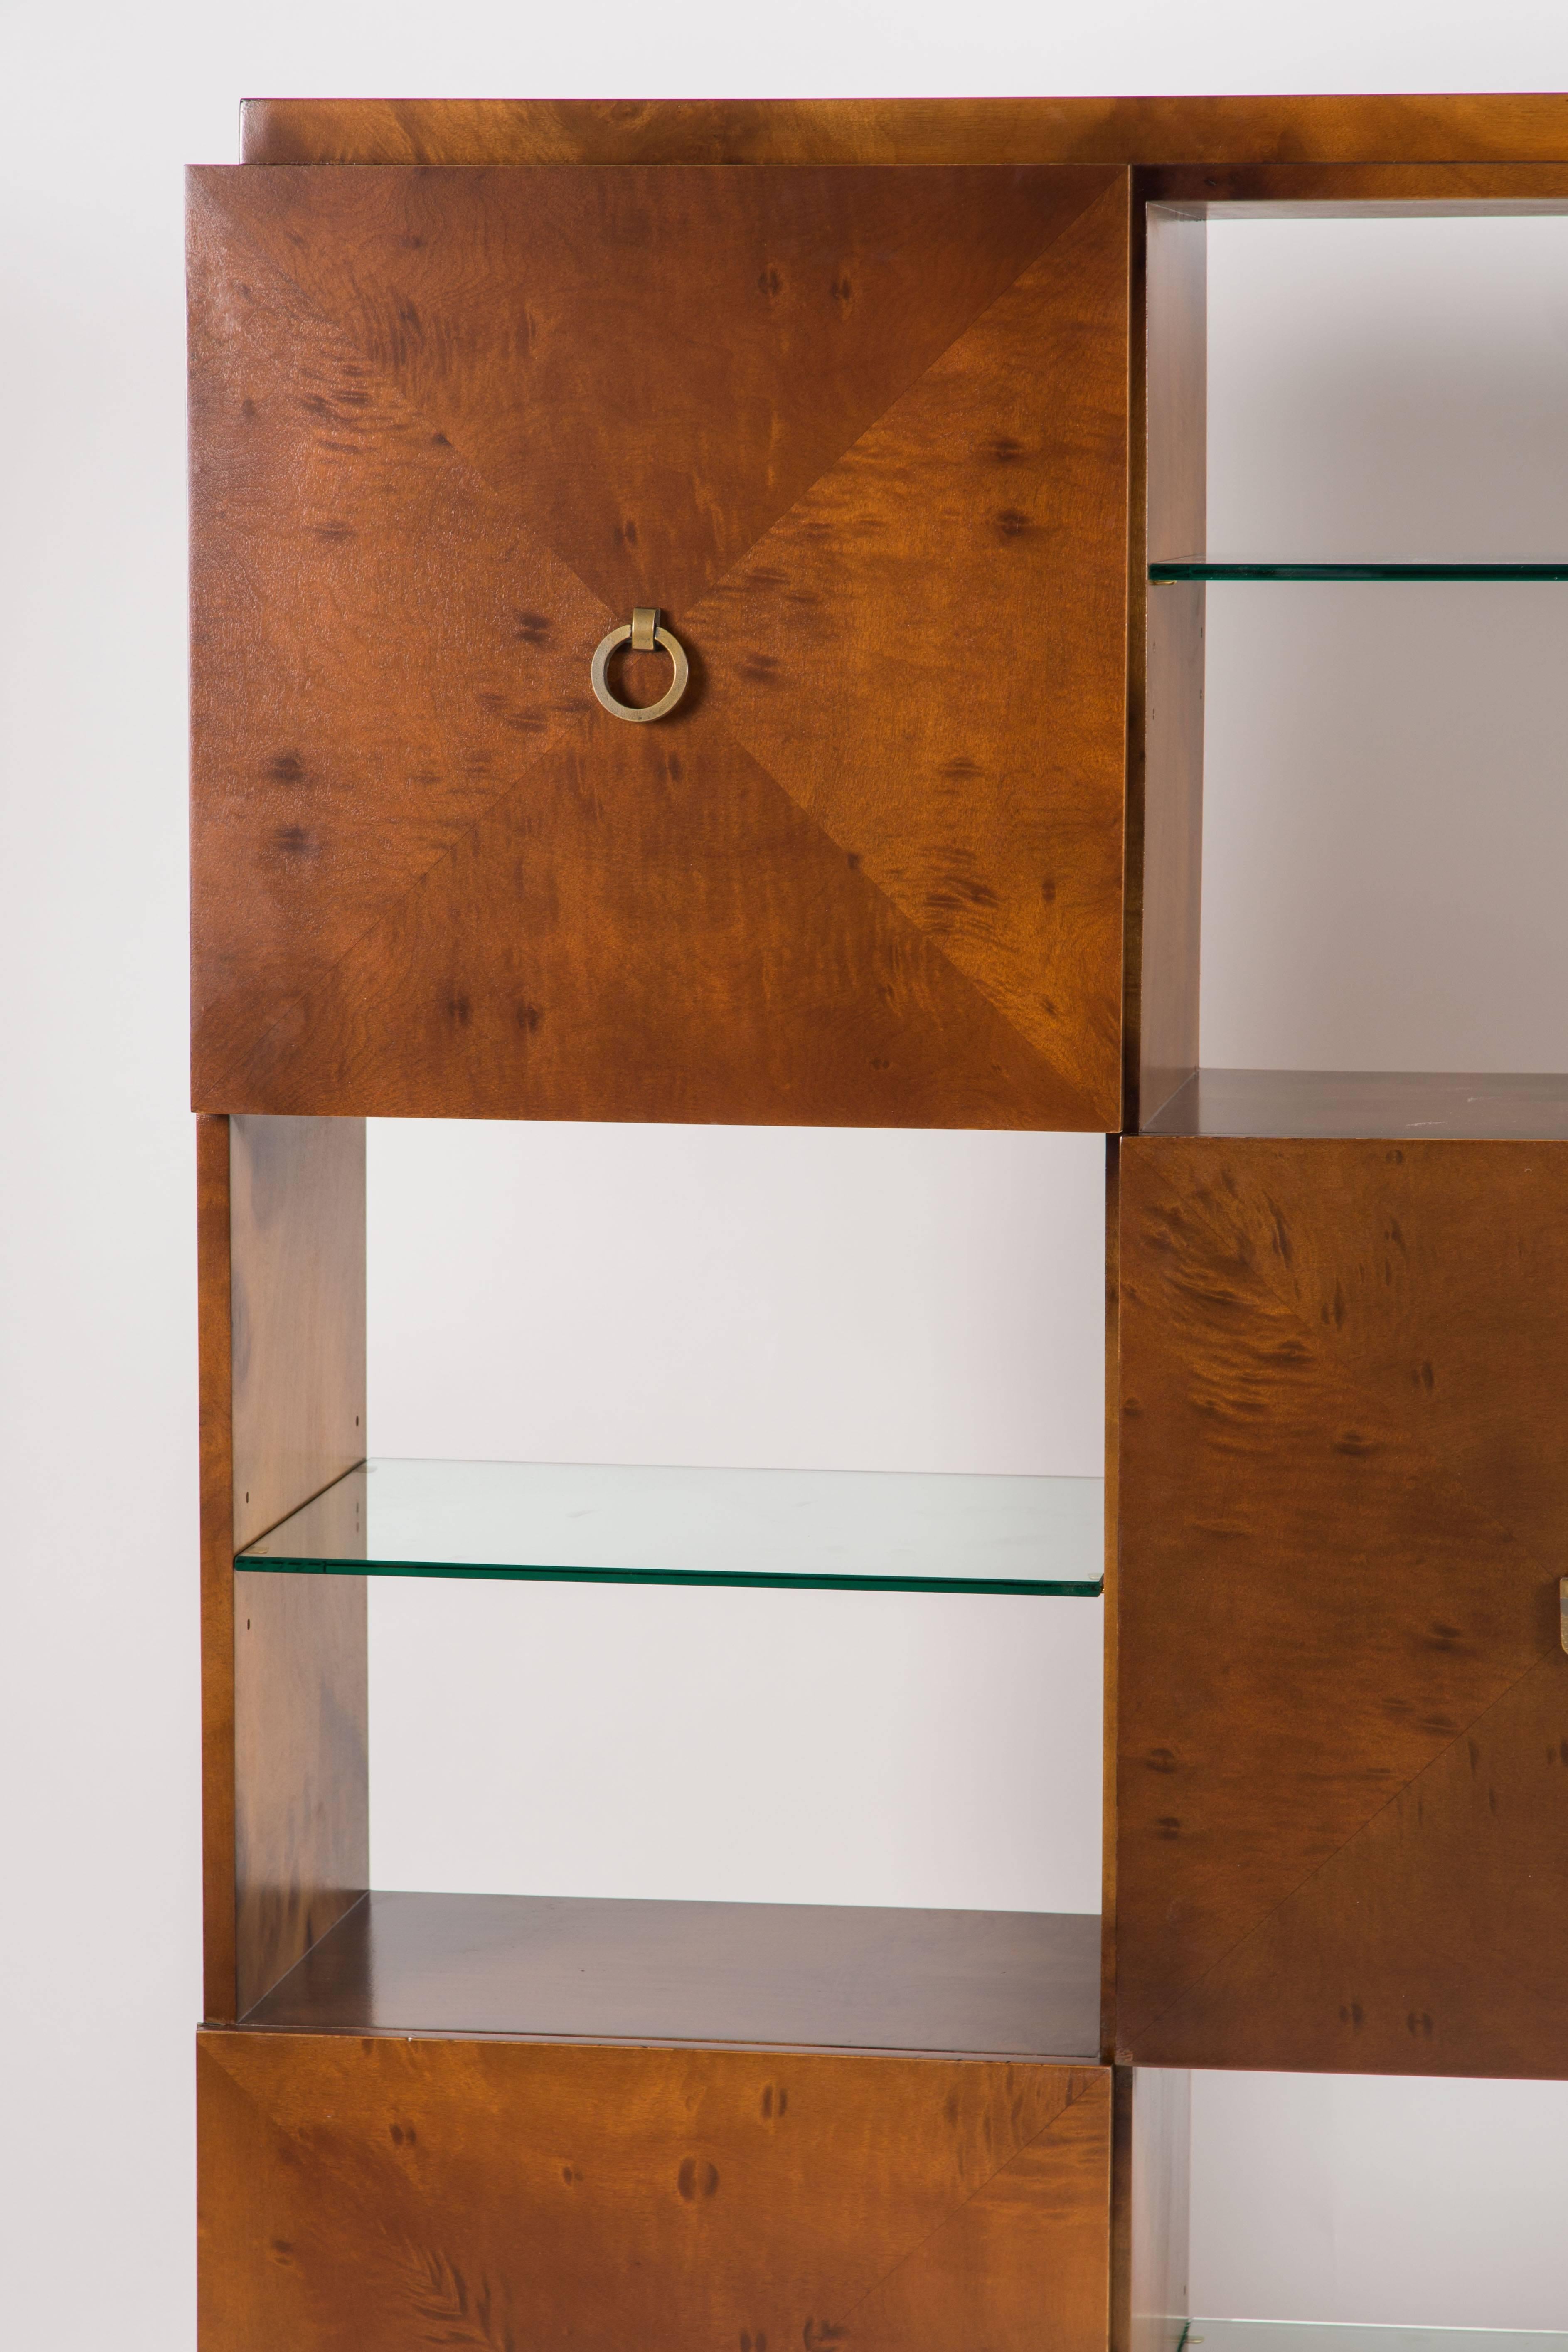 Burl Geometric Cabinet Bookcase with Drop Down Desk by Johan Tapp for Gumps